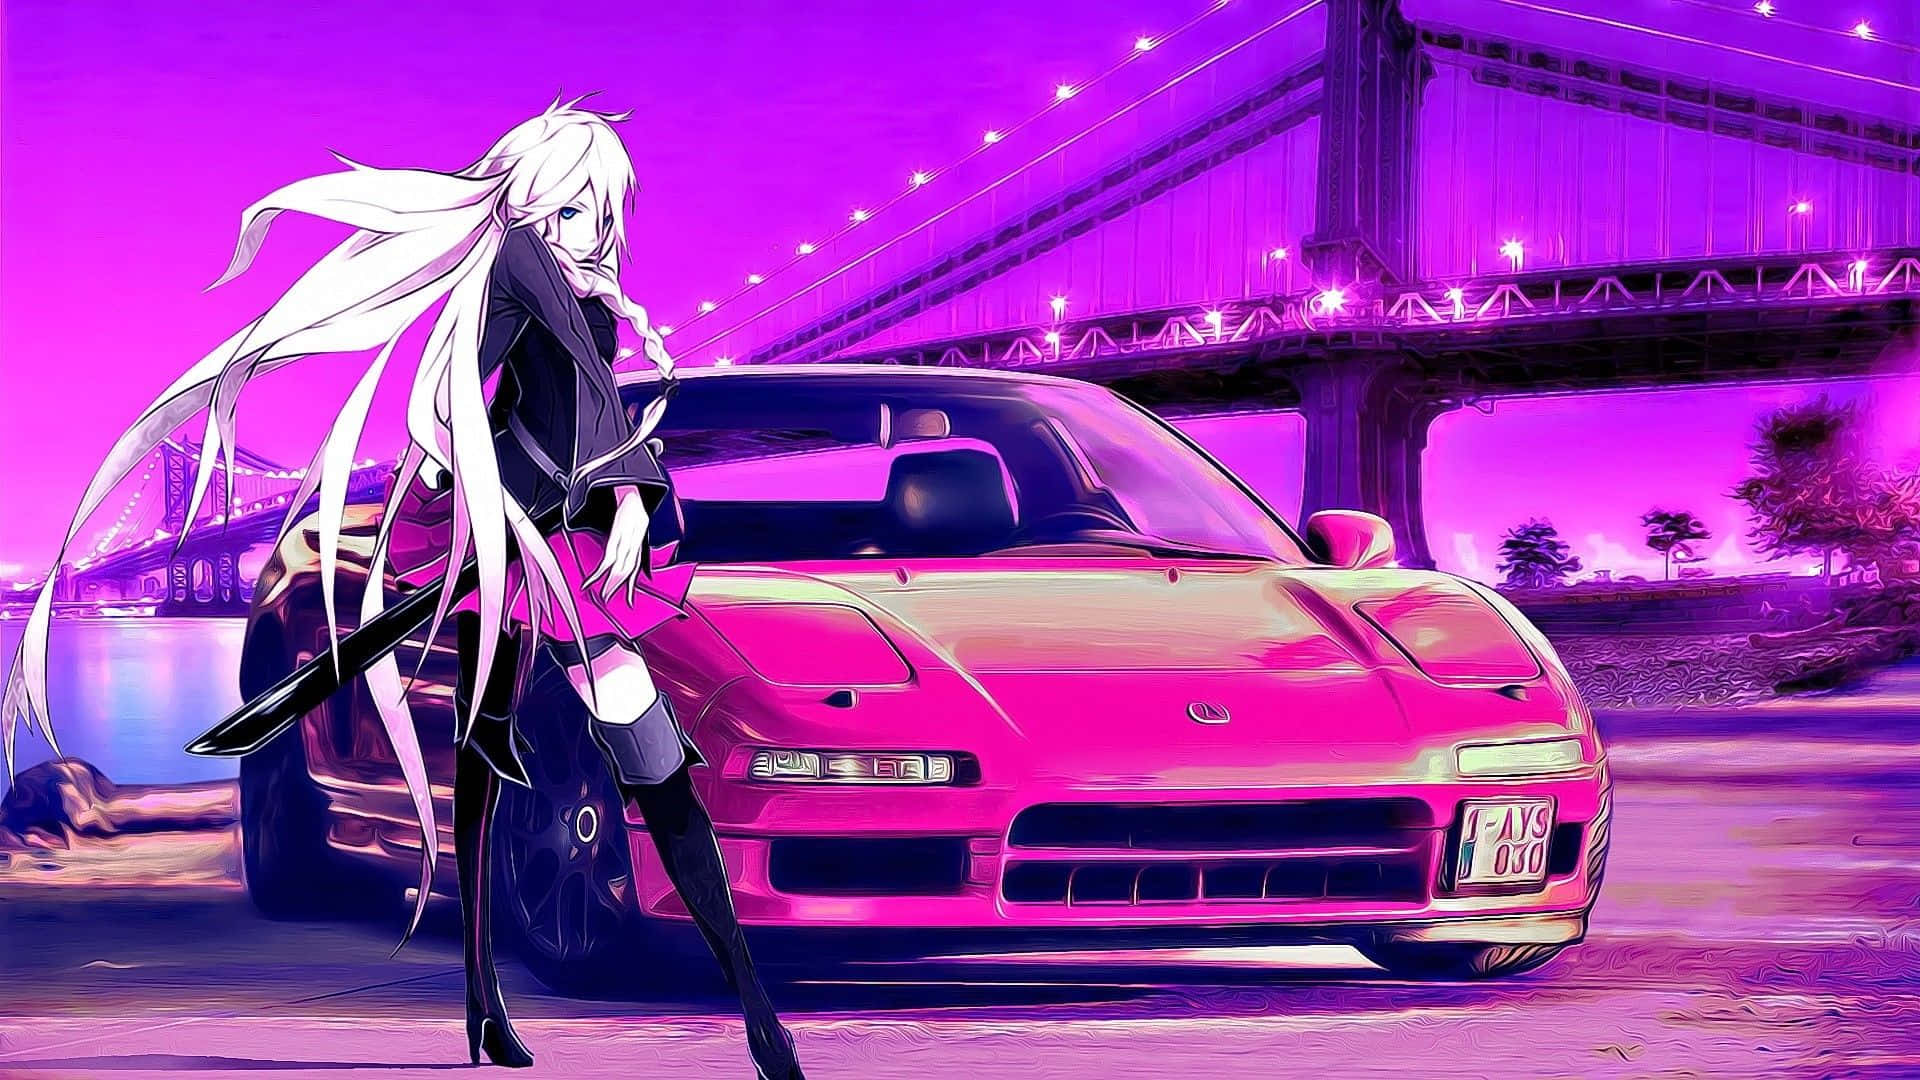 Check Out this Cool Anime-Inspired Car